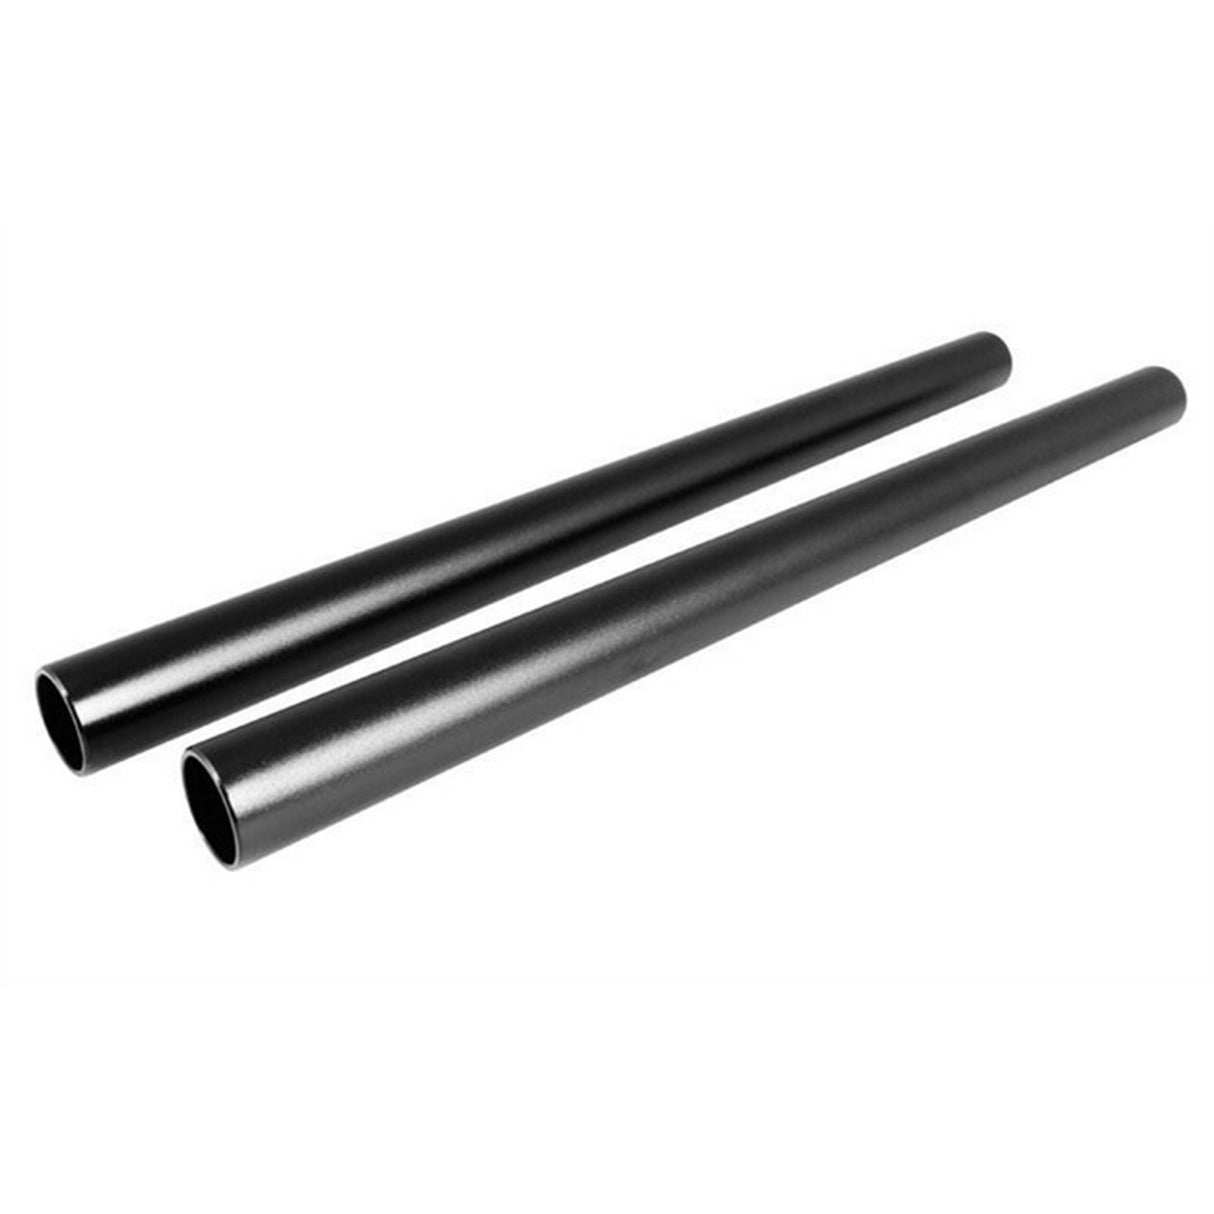 Genustech GMB-215 Support Bars, 215mm, Pair